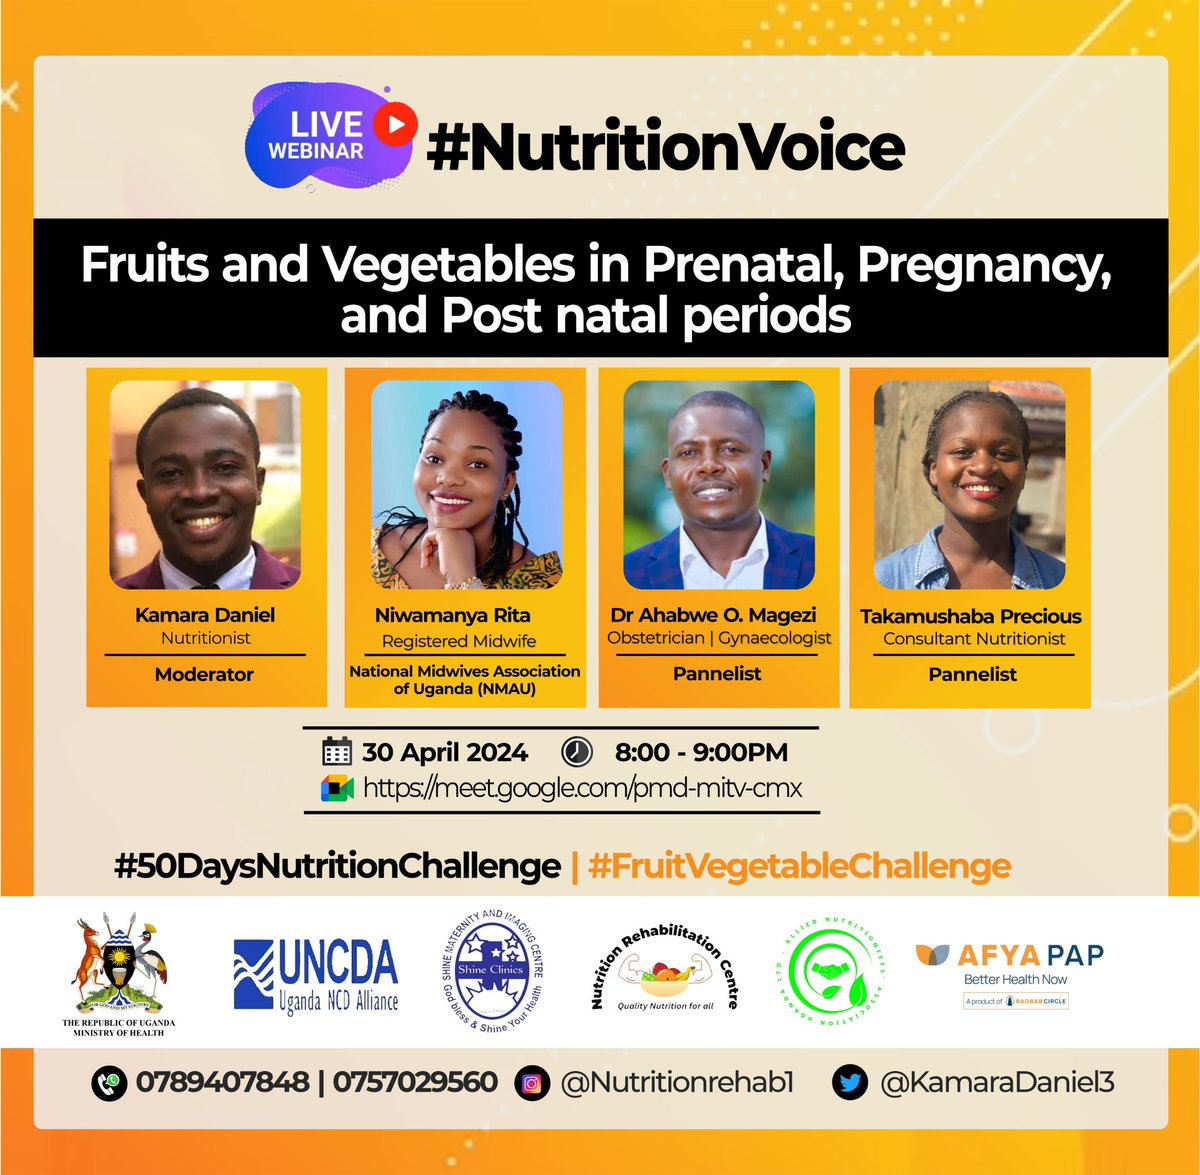 Are you preparing for Pregnancy? Have you delivered ? Or still pregnant, this is for you 
💃🏼💃🏼💃🏼💃🏼
On Day 12/50 in the FruitVegetableIntakeCampaign, join us as we discuss prenatal health needs.
meet.google.com/pmd-mitv-cmx.

#NutritionistVoice | #FruitsbandVegetableIntakeCampaign